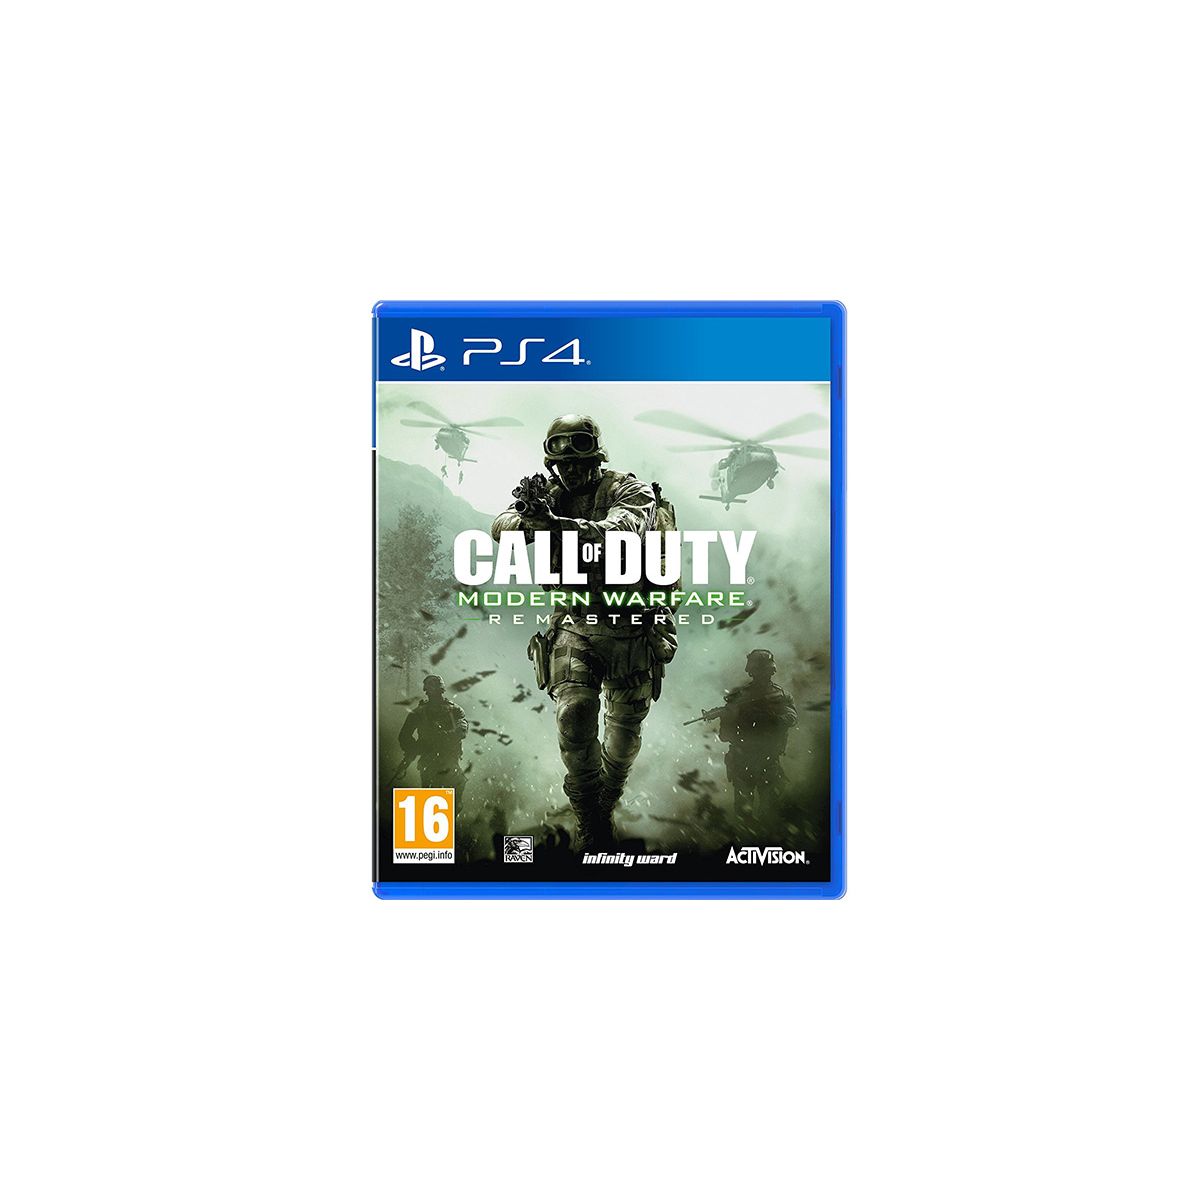 Call of duty remastered ps4